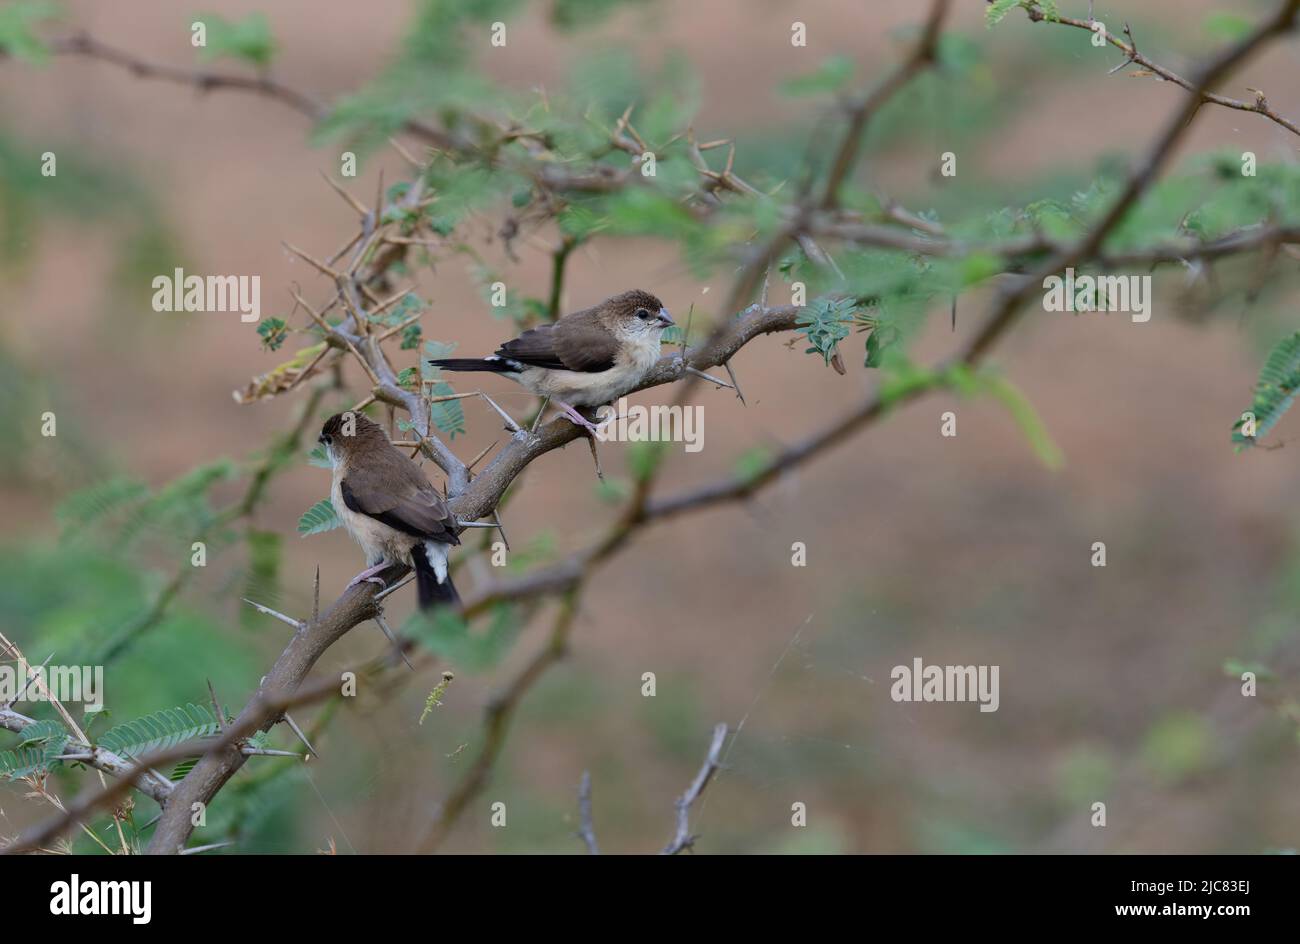 The Indian silverbill or white-throated munia,Koonthankulam bird sanctuary in Tamil Nadu, India. It is actively protected and managed by the villagers Stock Photo